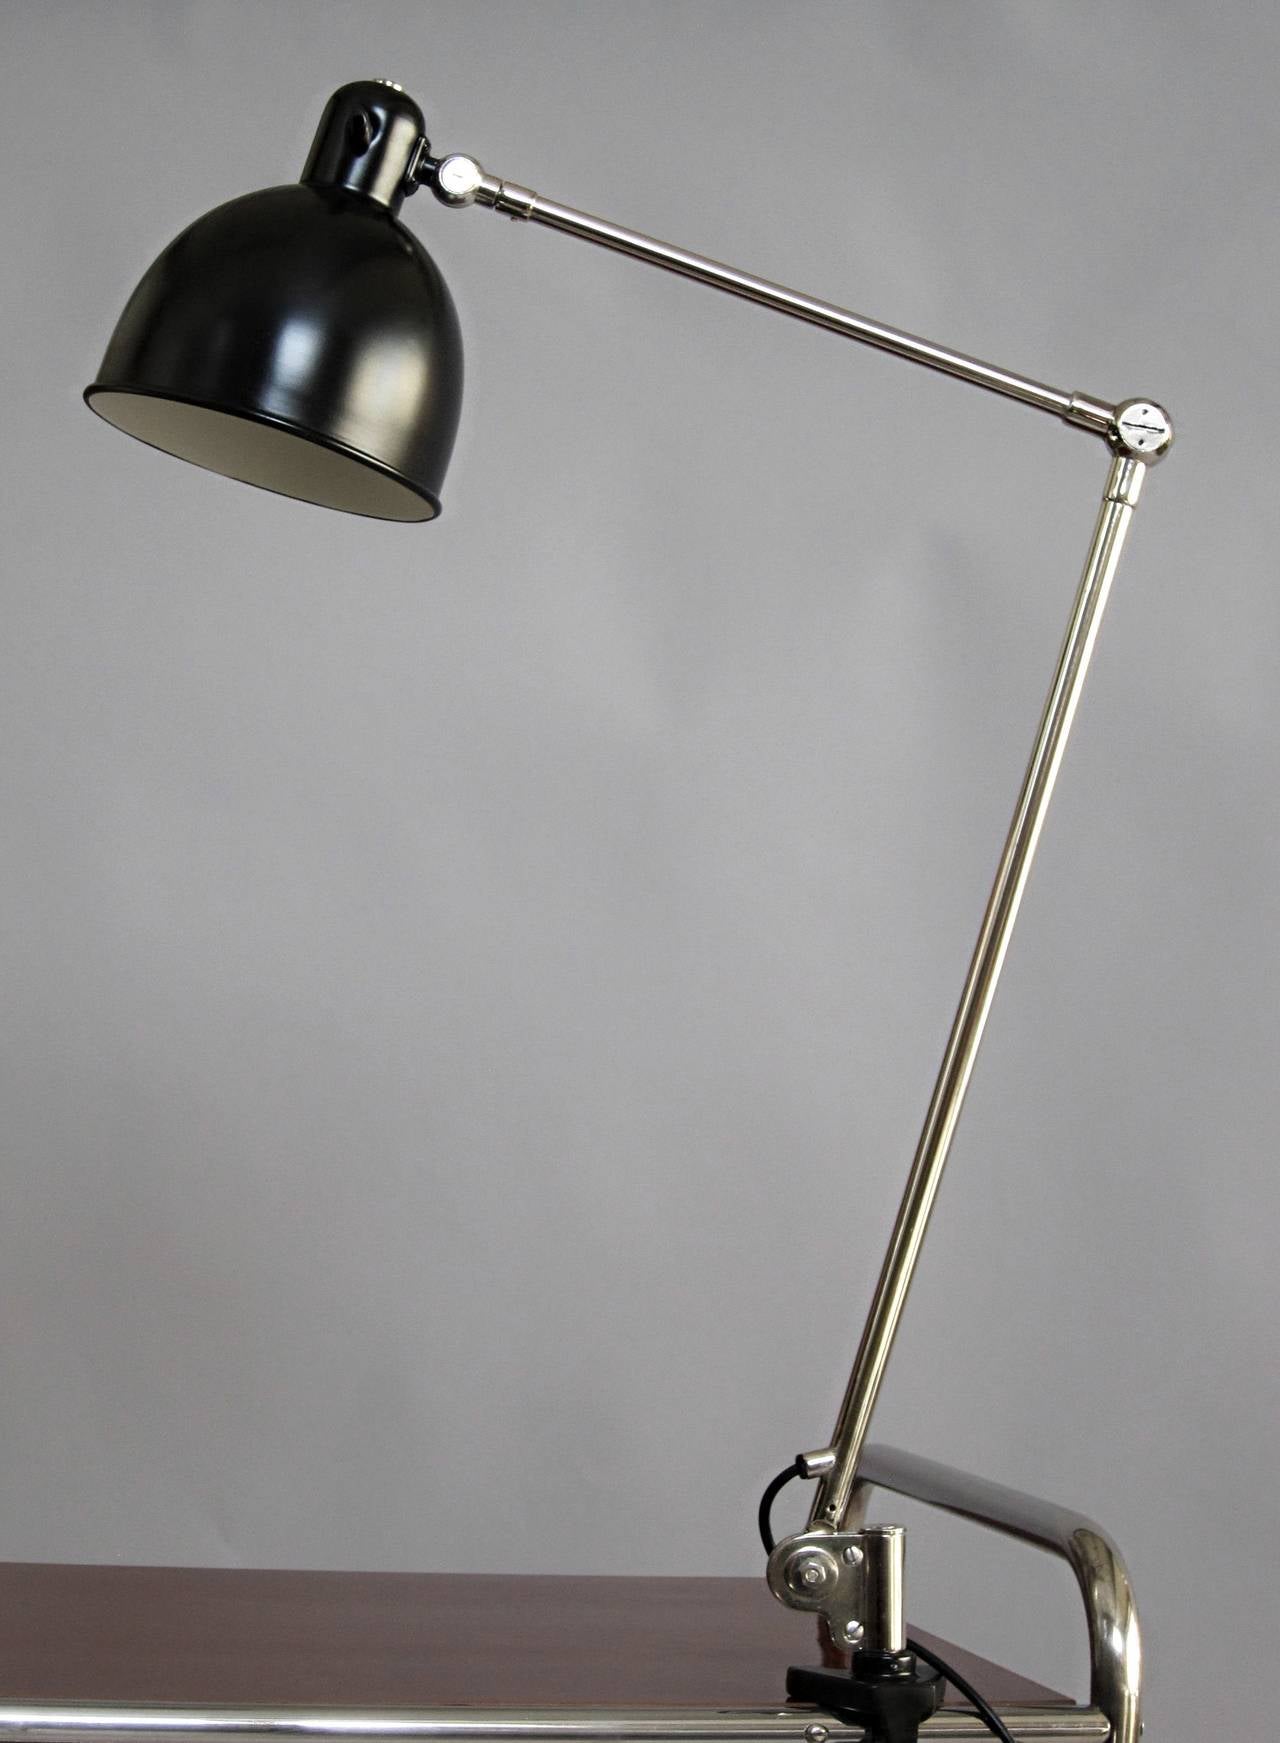 Desk lamp by Belmag, Zurich, Switzerland, 1940s, nickel-plated leverage and black lacquered aluminum shade, restored and rewired.
The lamp can be rotated and moved in many different positions.